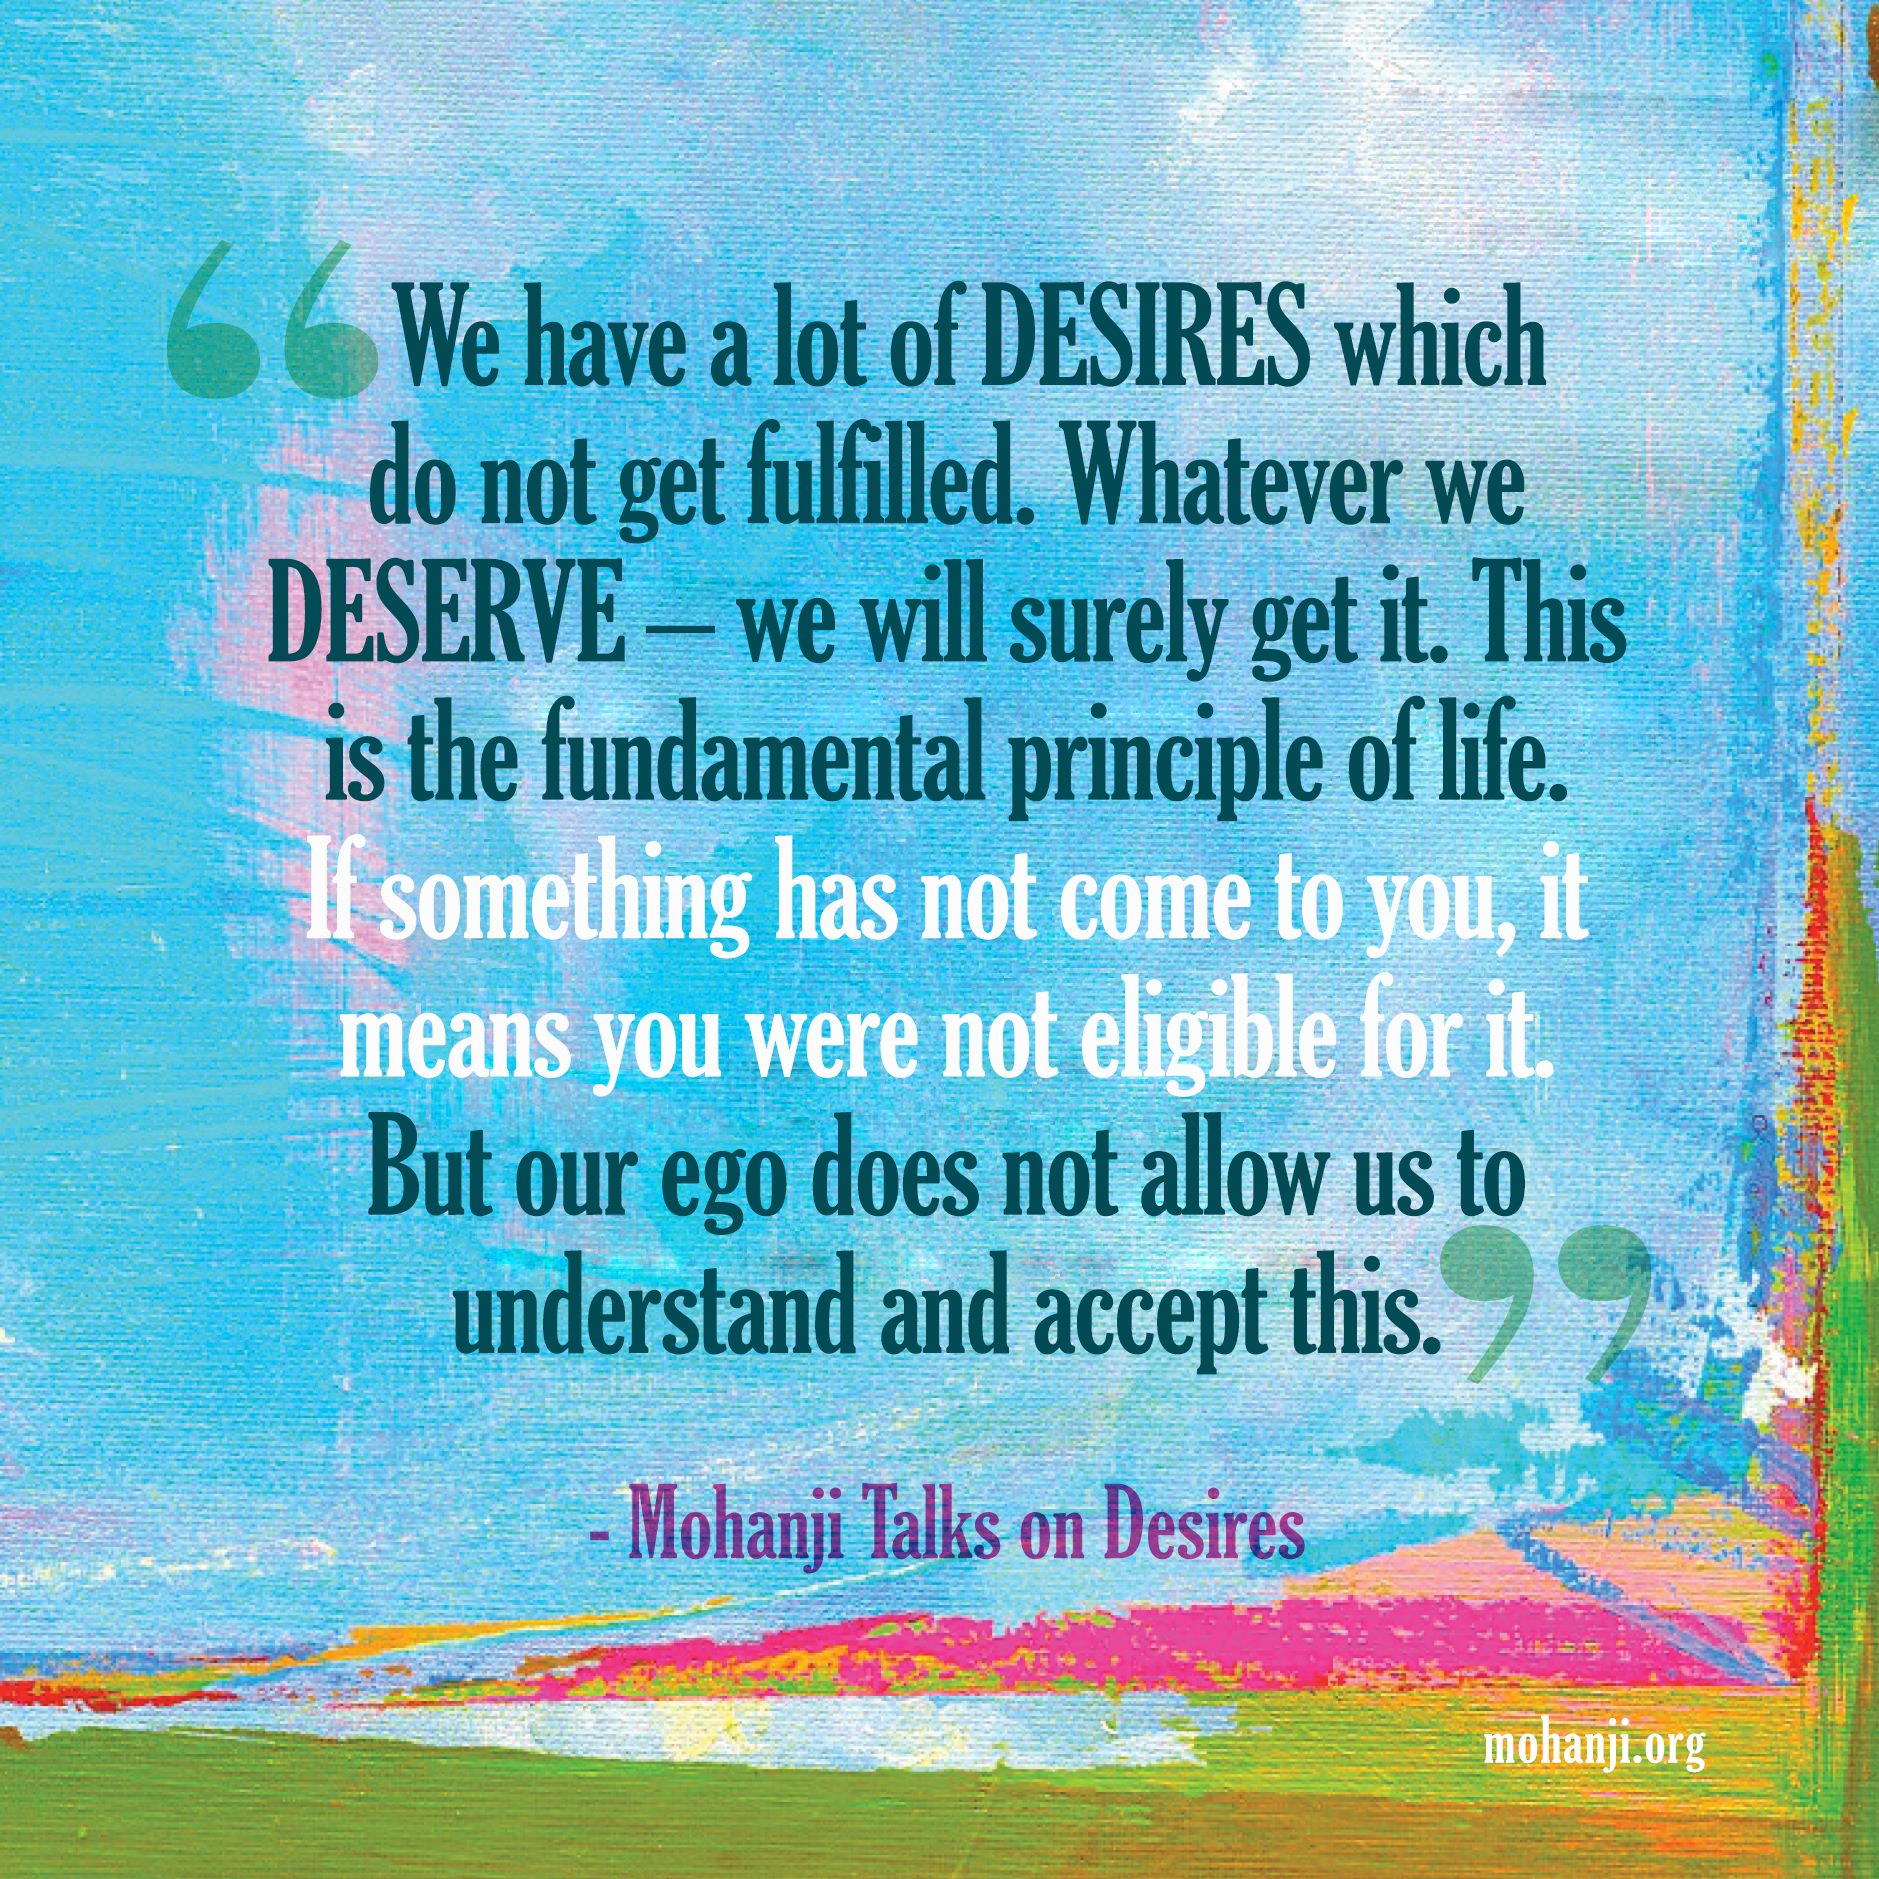 Mohanji quote - Desires and eligibility